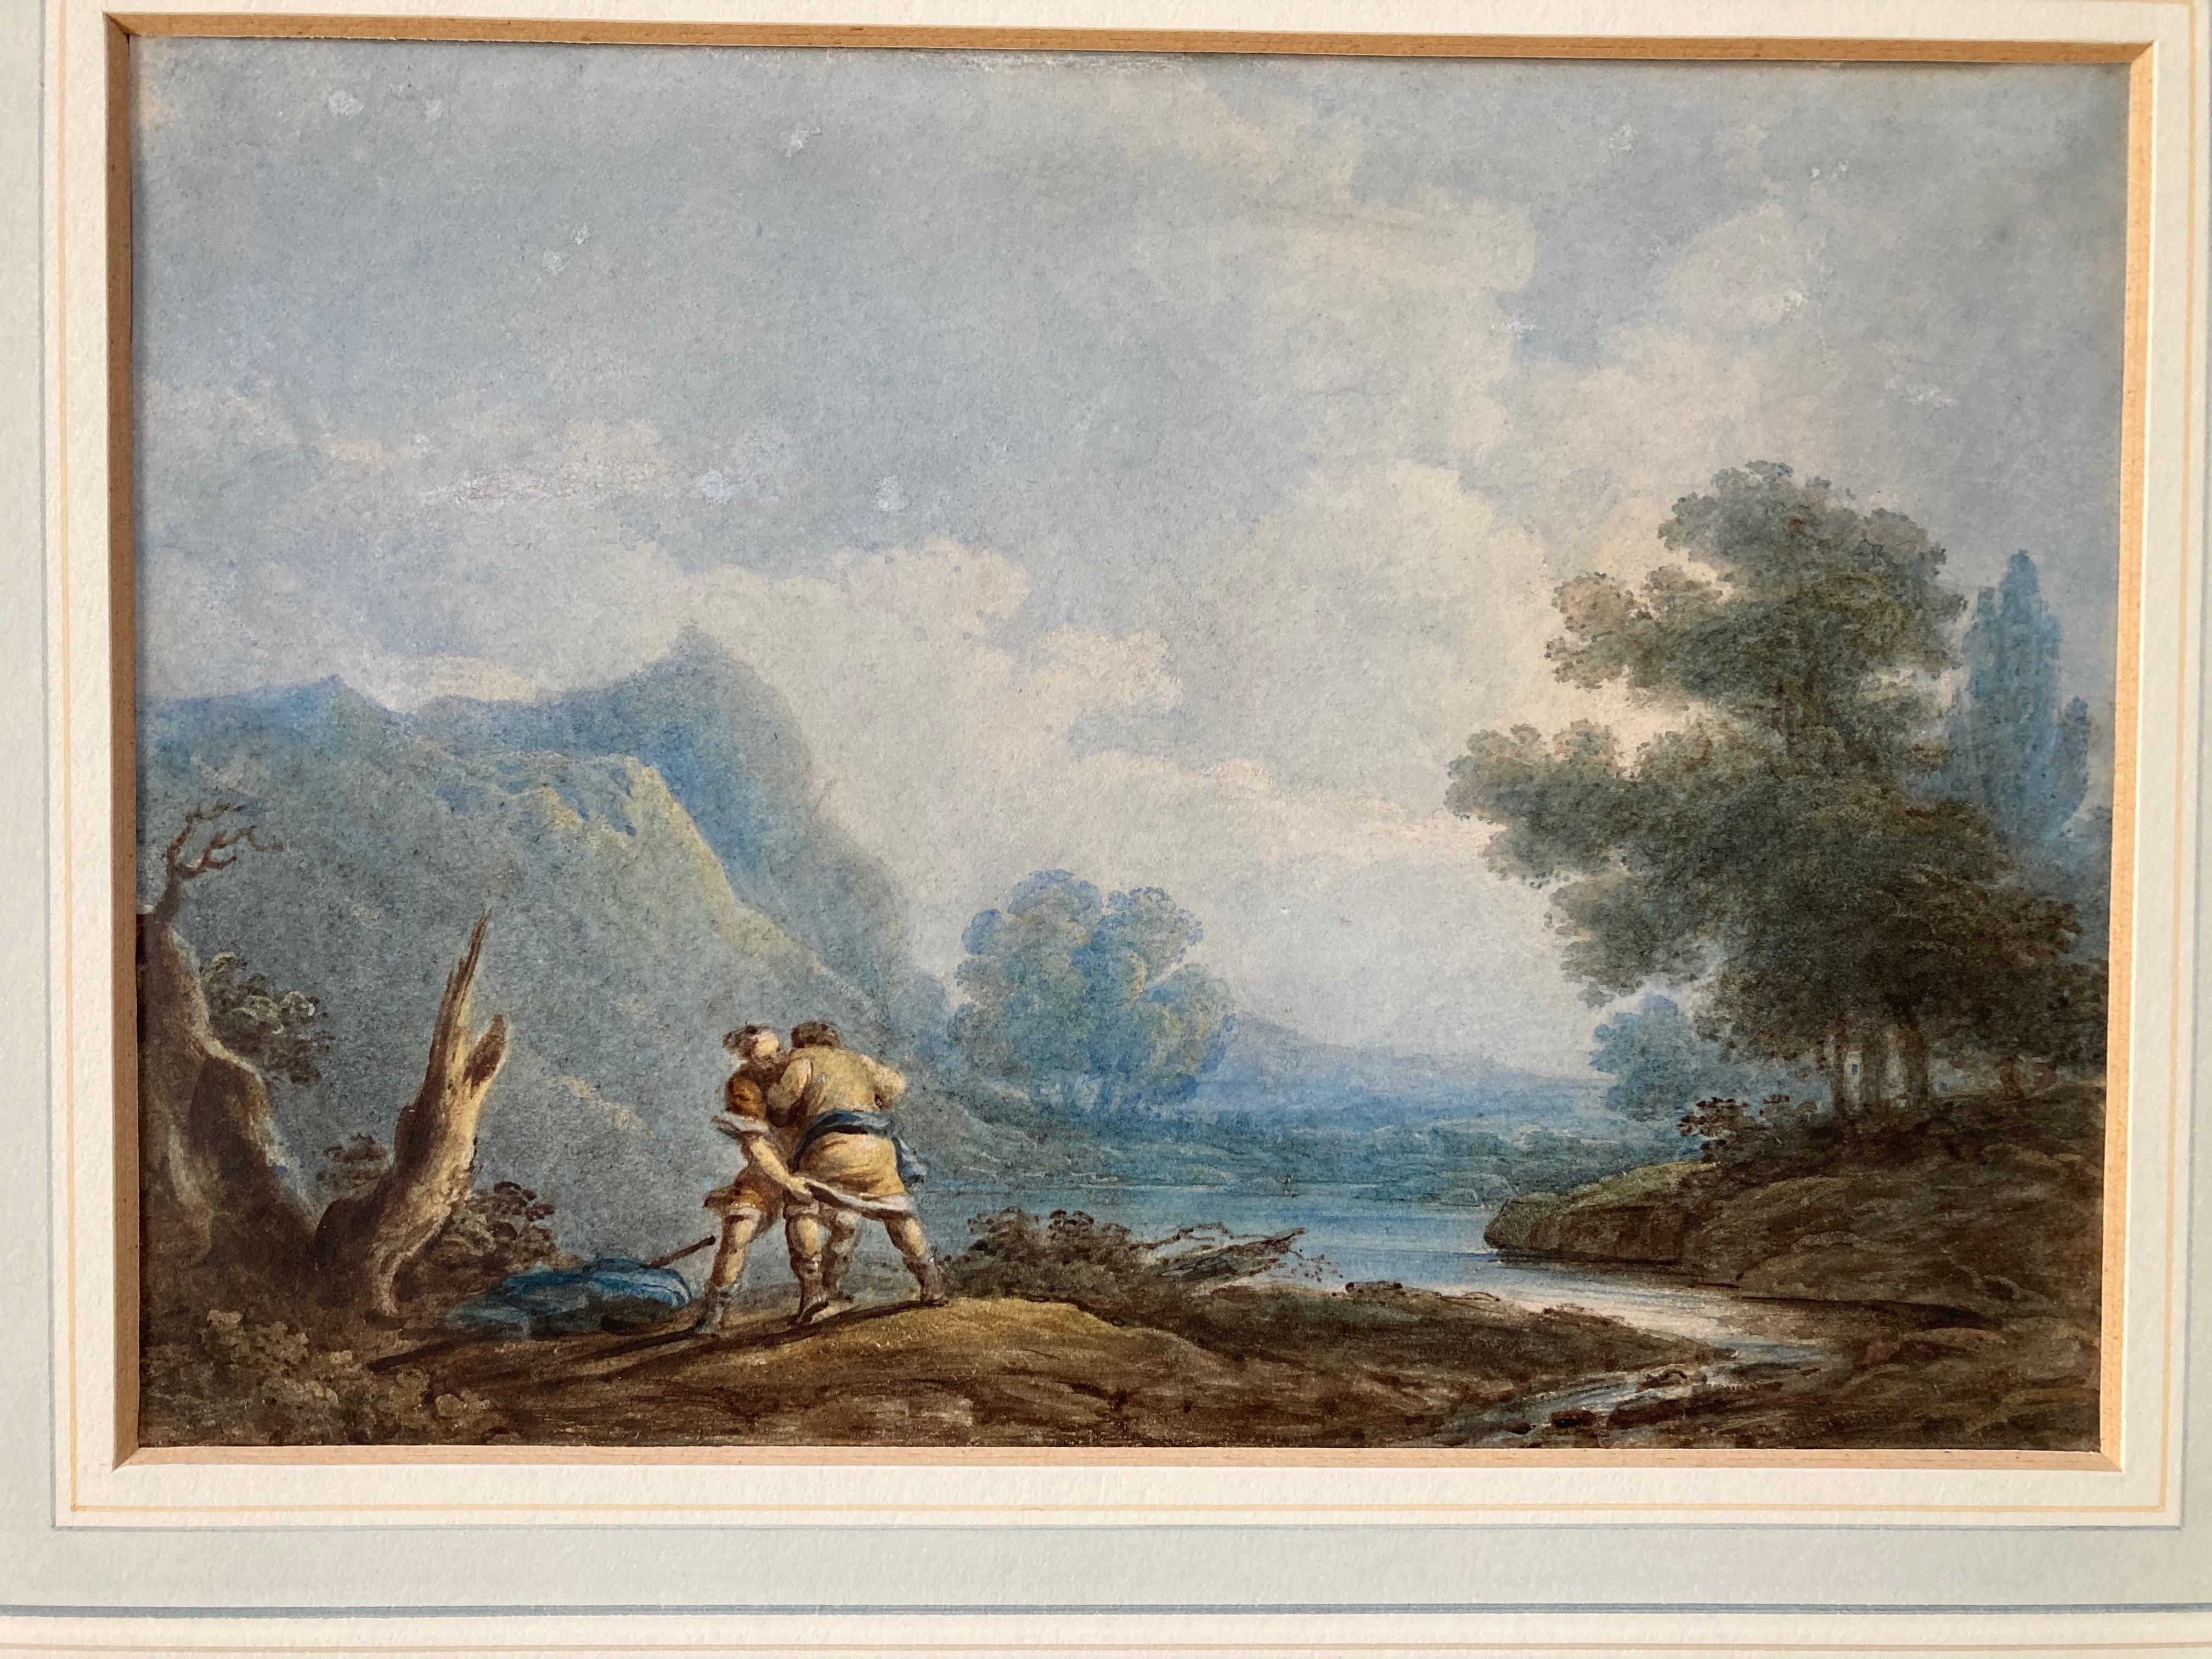 A fascinating 19th century view of Chinese Sumo wrestlers in a mountainous landscape

Circle of George Chinnery (1774-1852)
Chinese wrestlers in a landscape
Watercolour
6 x 8½ inches excluding the frame
13½ x 15½ inches with the frame
With an